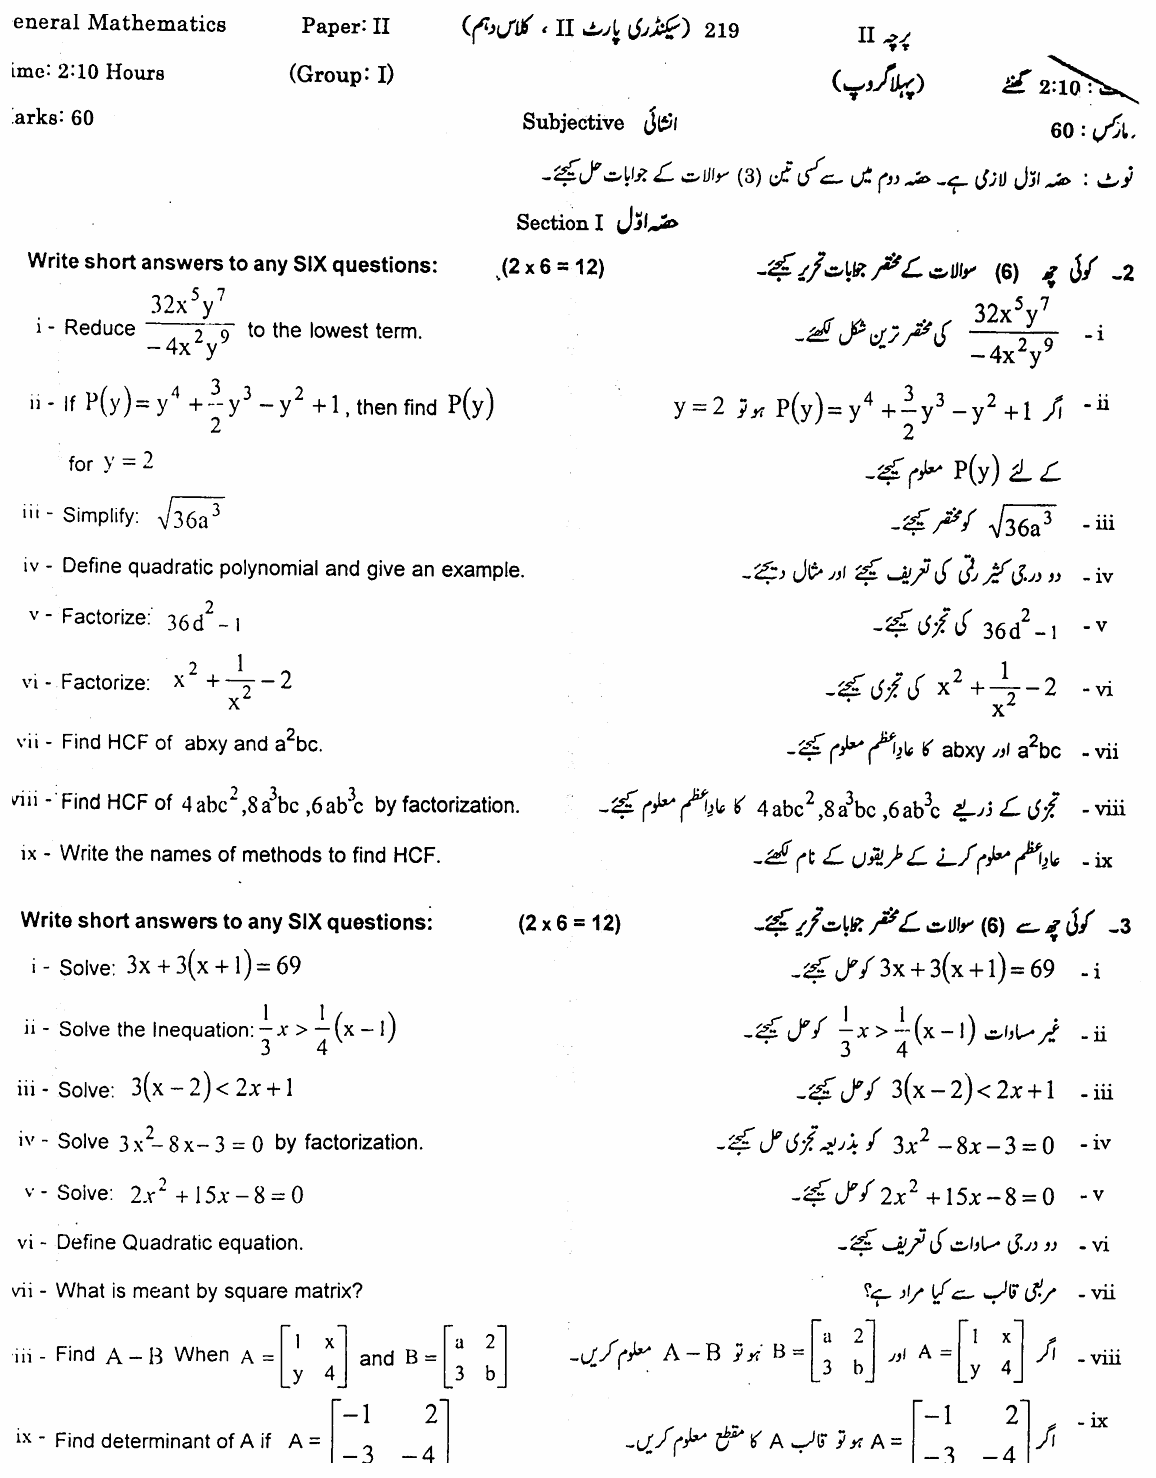 10th Class General Mathematics Paper 2019 Gujranwala Board Subjective Group 1